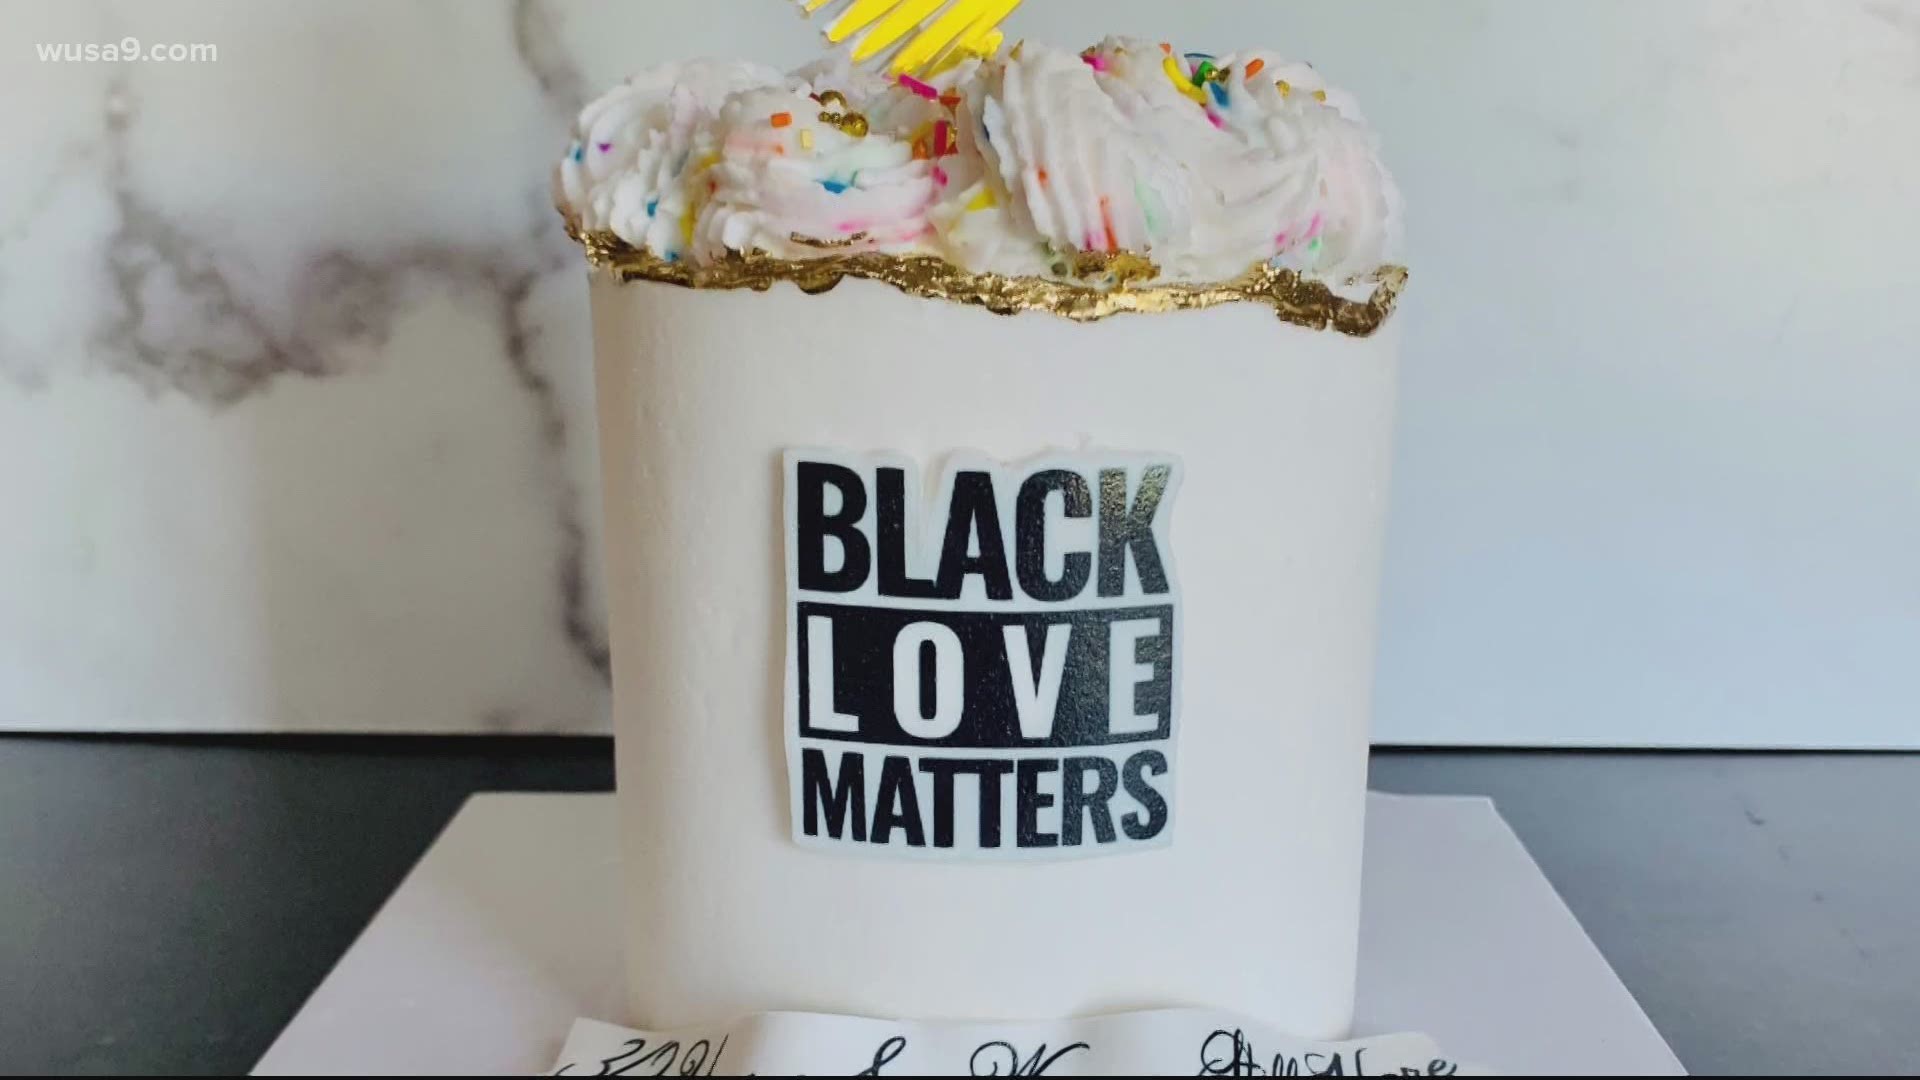 Loudoun Shops Black is a new website created this month. The goal is to provide a resource that has all of the area's black-owned businesses in one place.